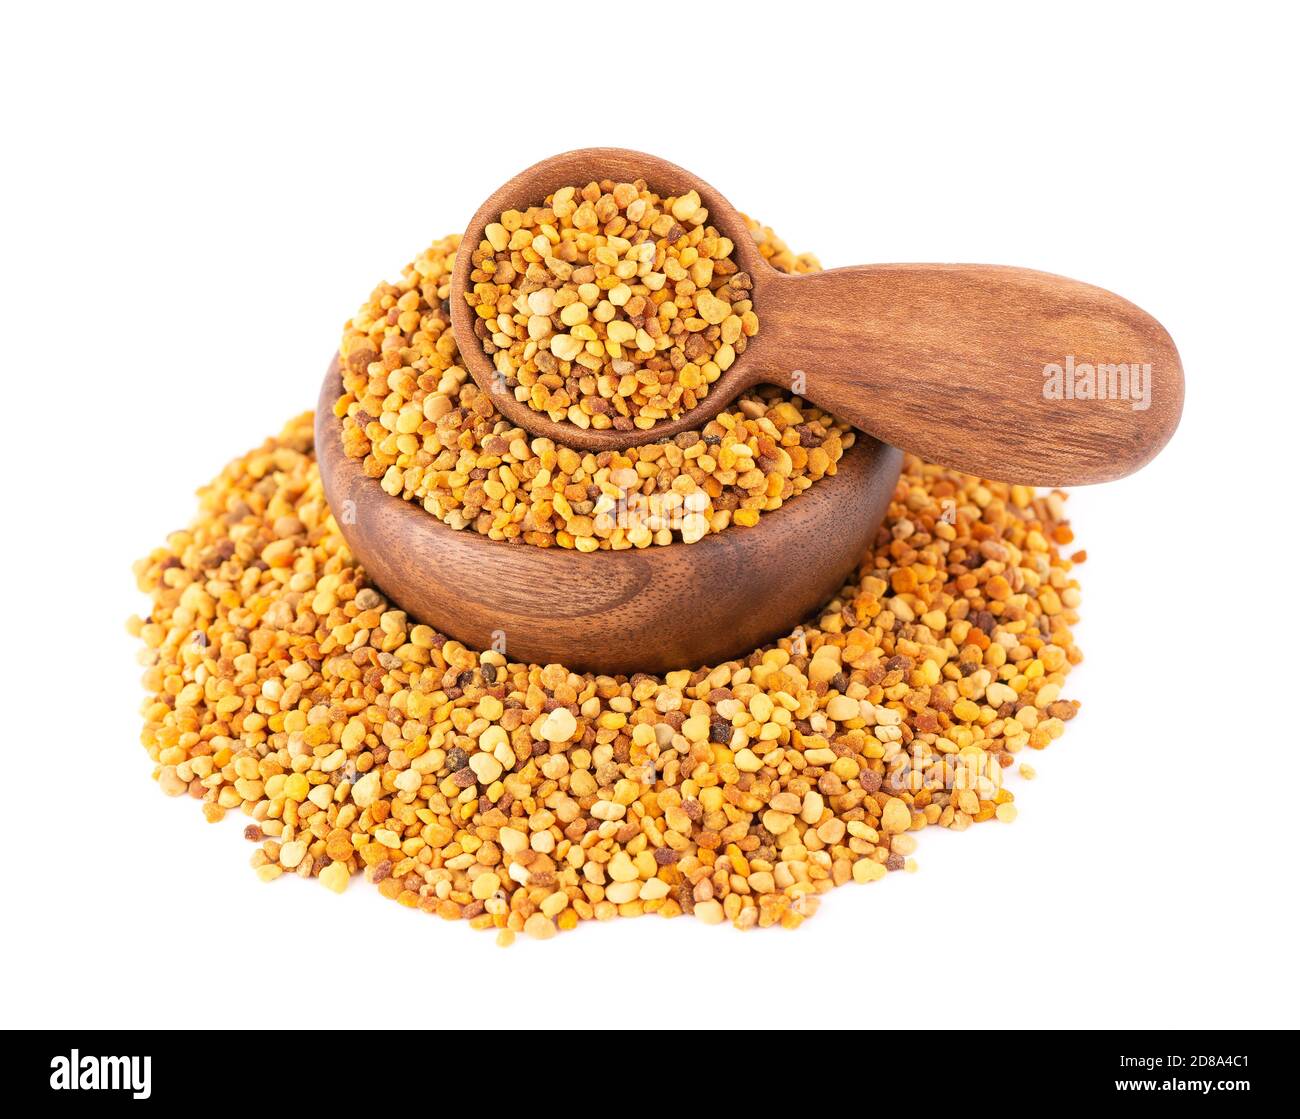 Flower pollen grains in wooden bowl and spoon, isolated on white background. Pile of bee pollen or perga. Stock Photo